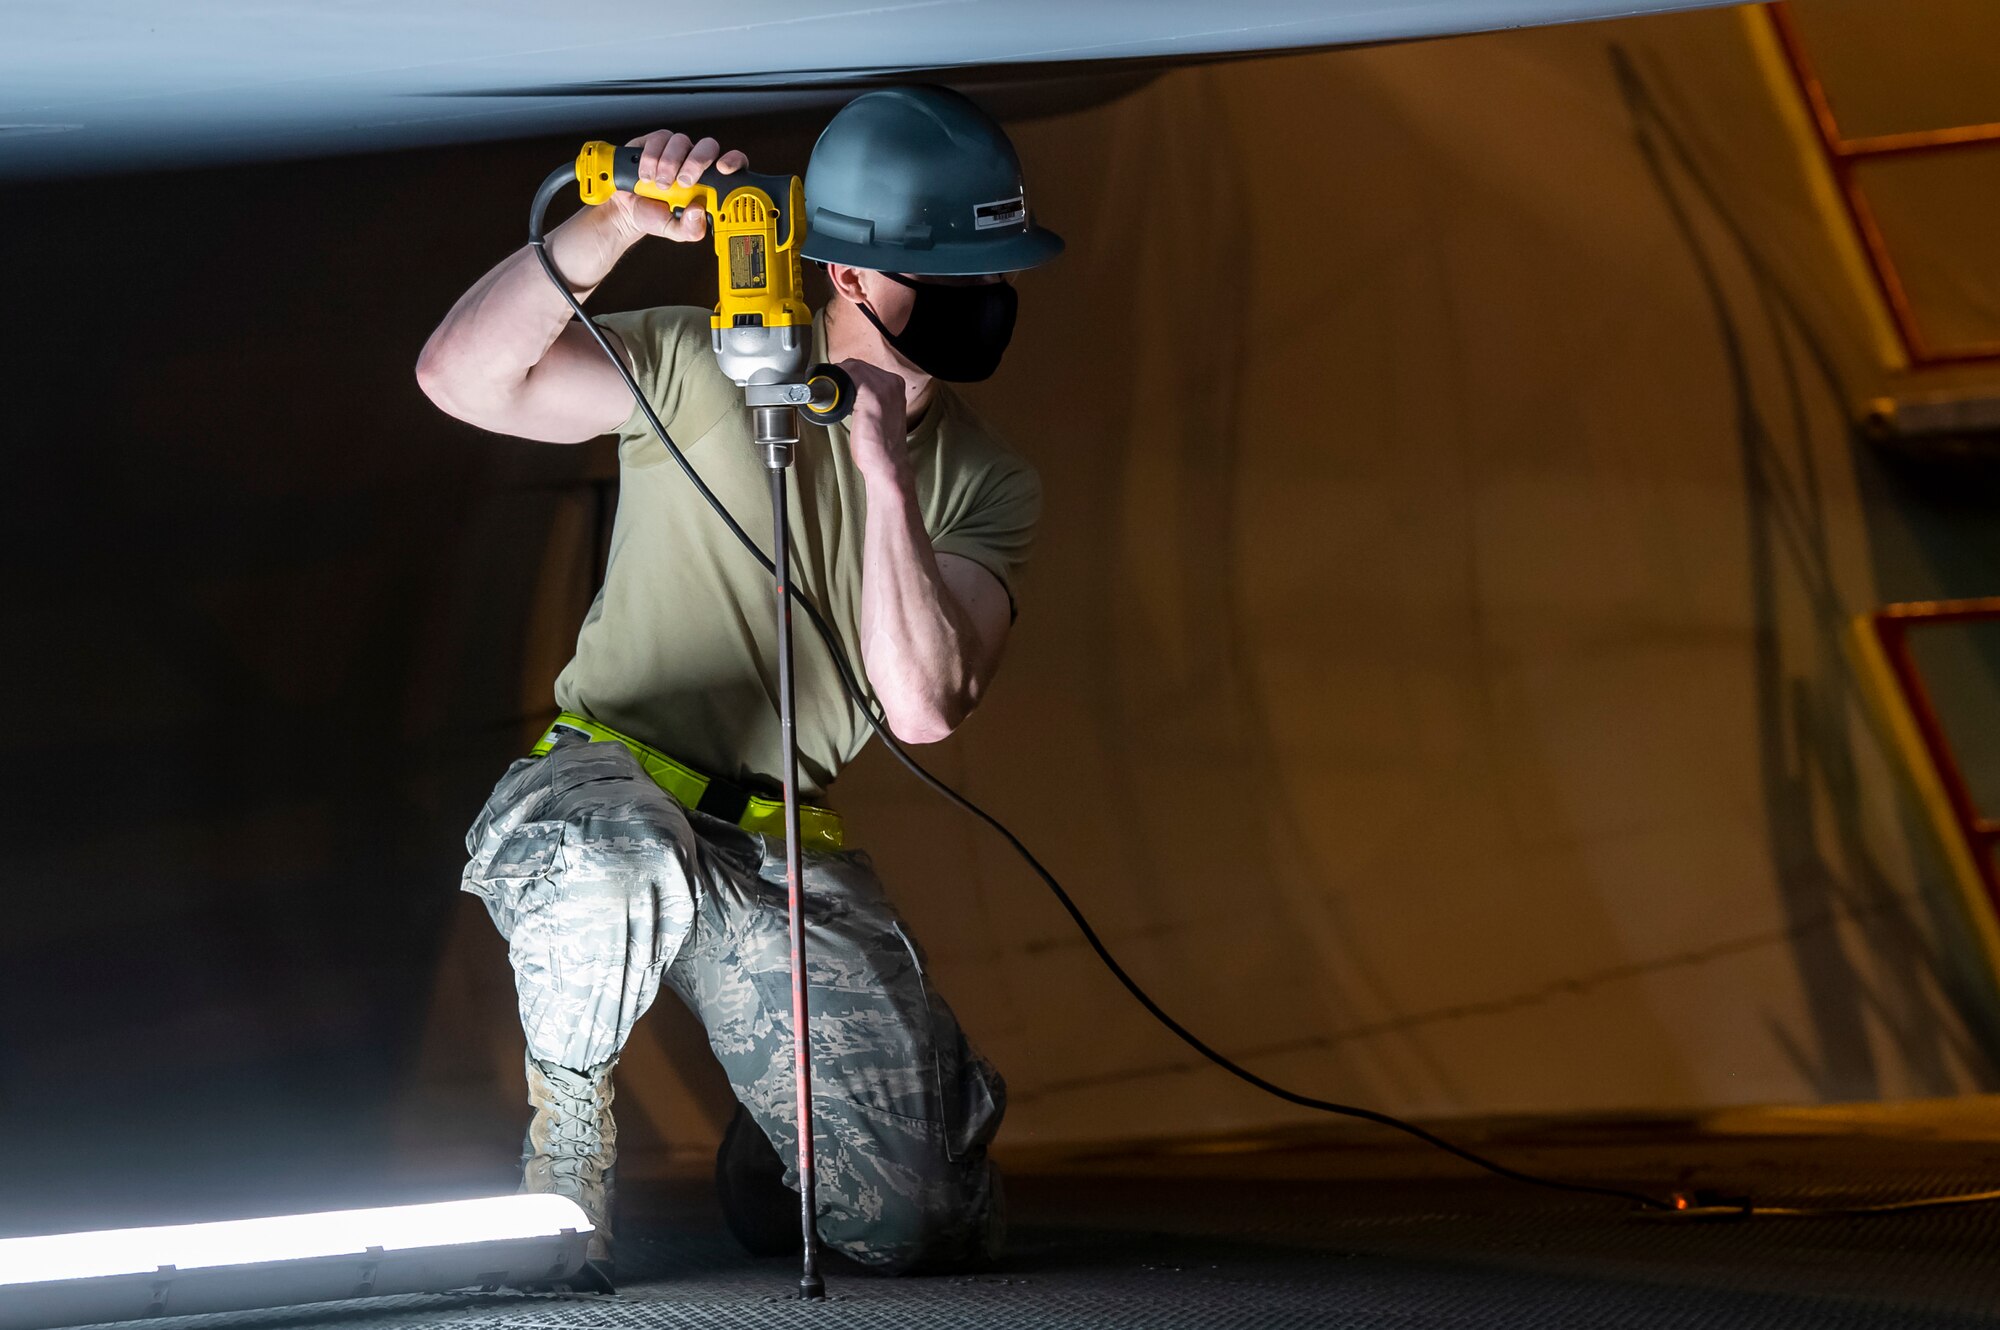 Airman 1st Class Robert Moody, 436th Maintenance Squadron C-5 regional isochronal apprentice, uses a stand-up drill to place stands close to the side of a C-5 Super Galaxy engine at Dover Air Force Base, Delaware, April 9, 2020.  Moody wears a cloth mask  in accordance with Department of Defense instruction to mitigate the spread of COVID-19. (U.S. Air Force photo by Senior Airman Christopher Quail)